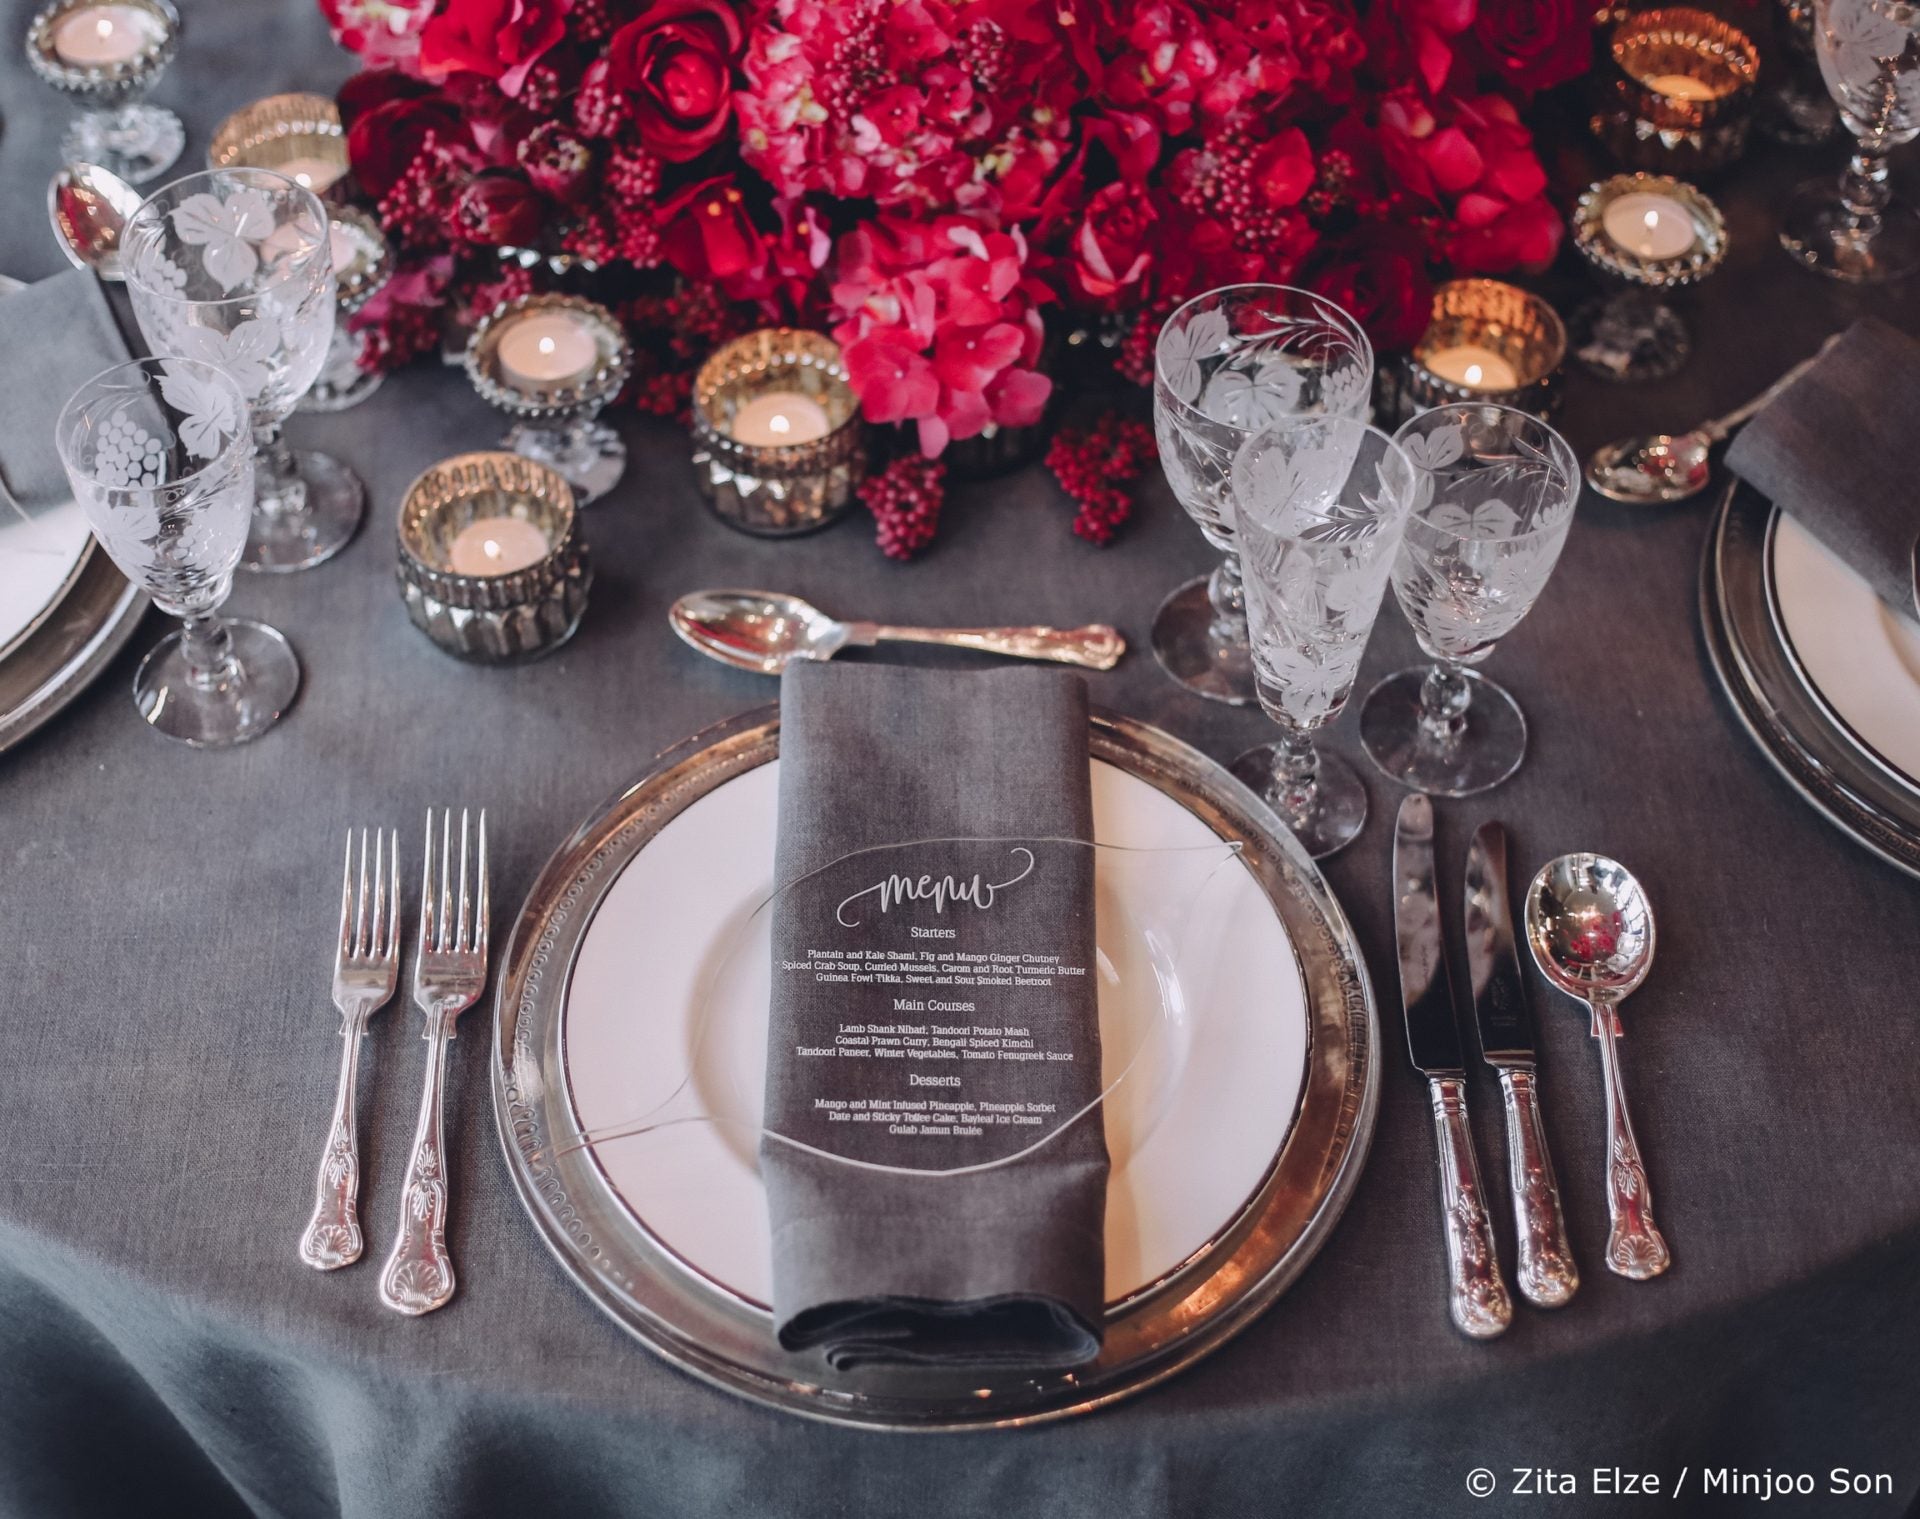 Dine set up with elegant cuttlery grey table cloth and red flowers